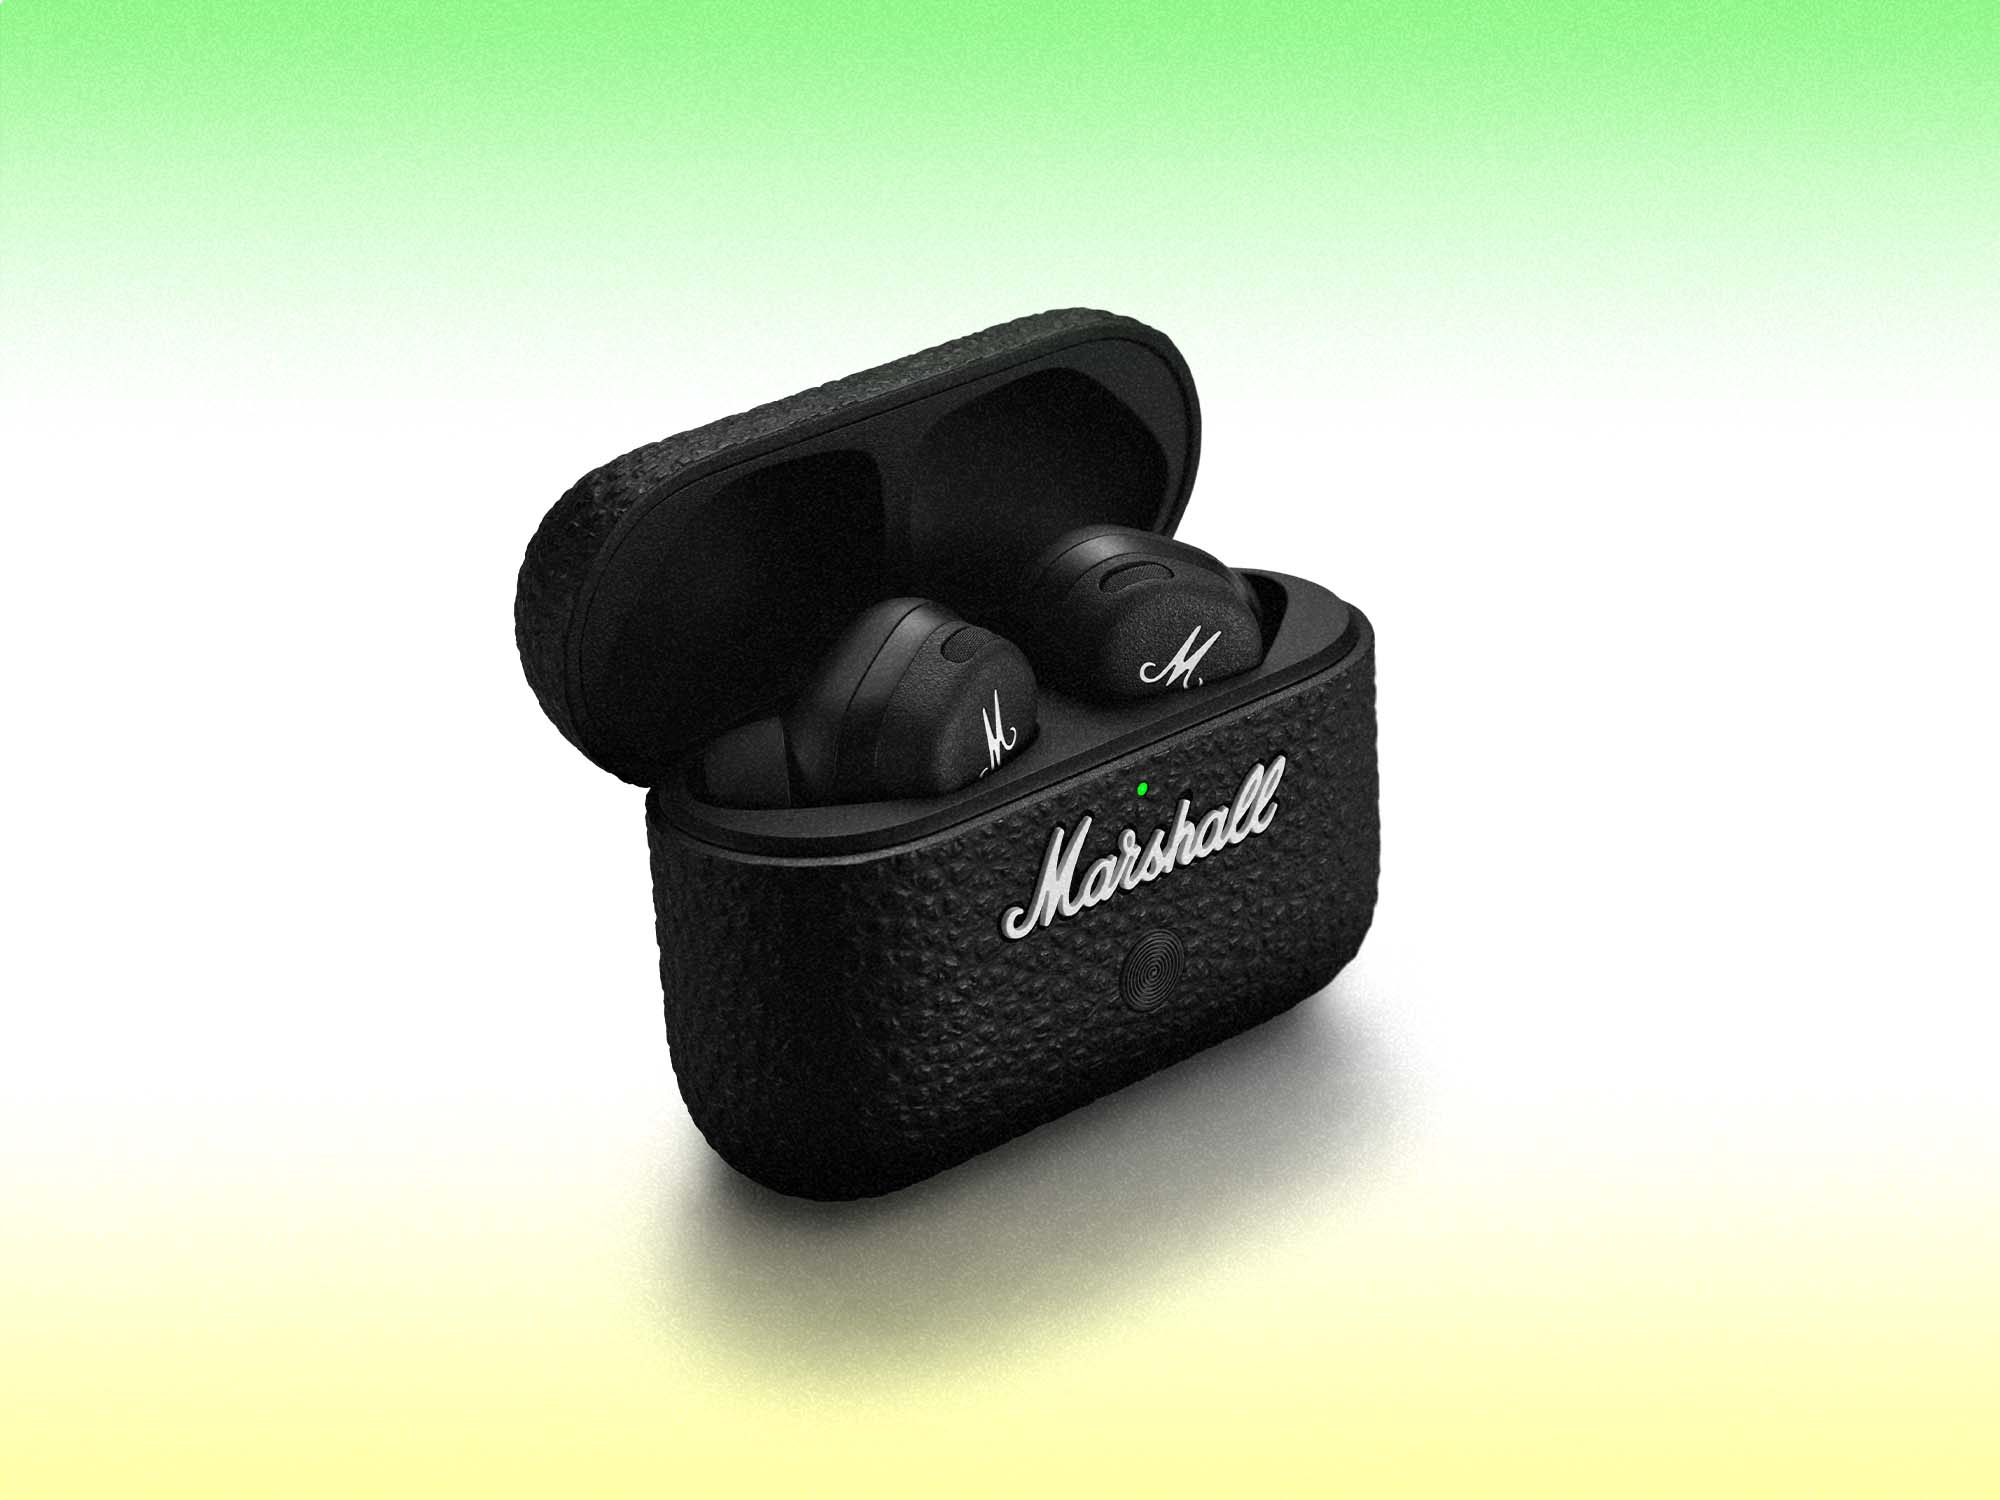 Marshall Motif II buds in a branded case